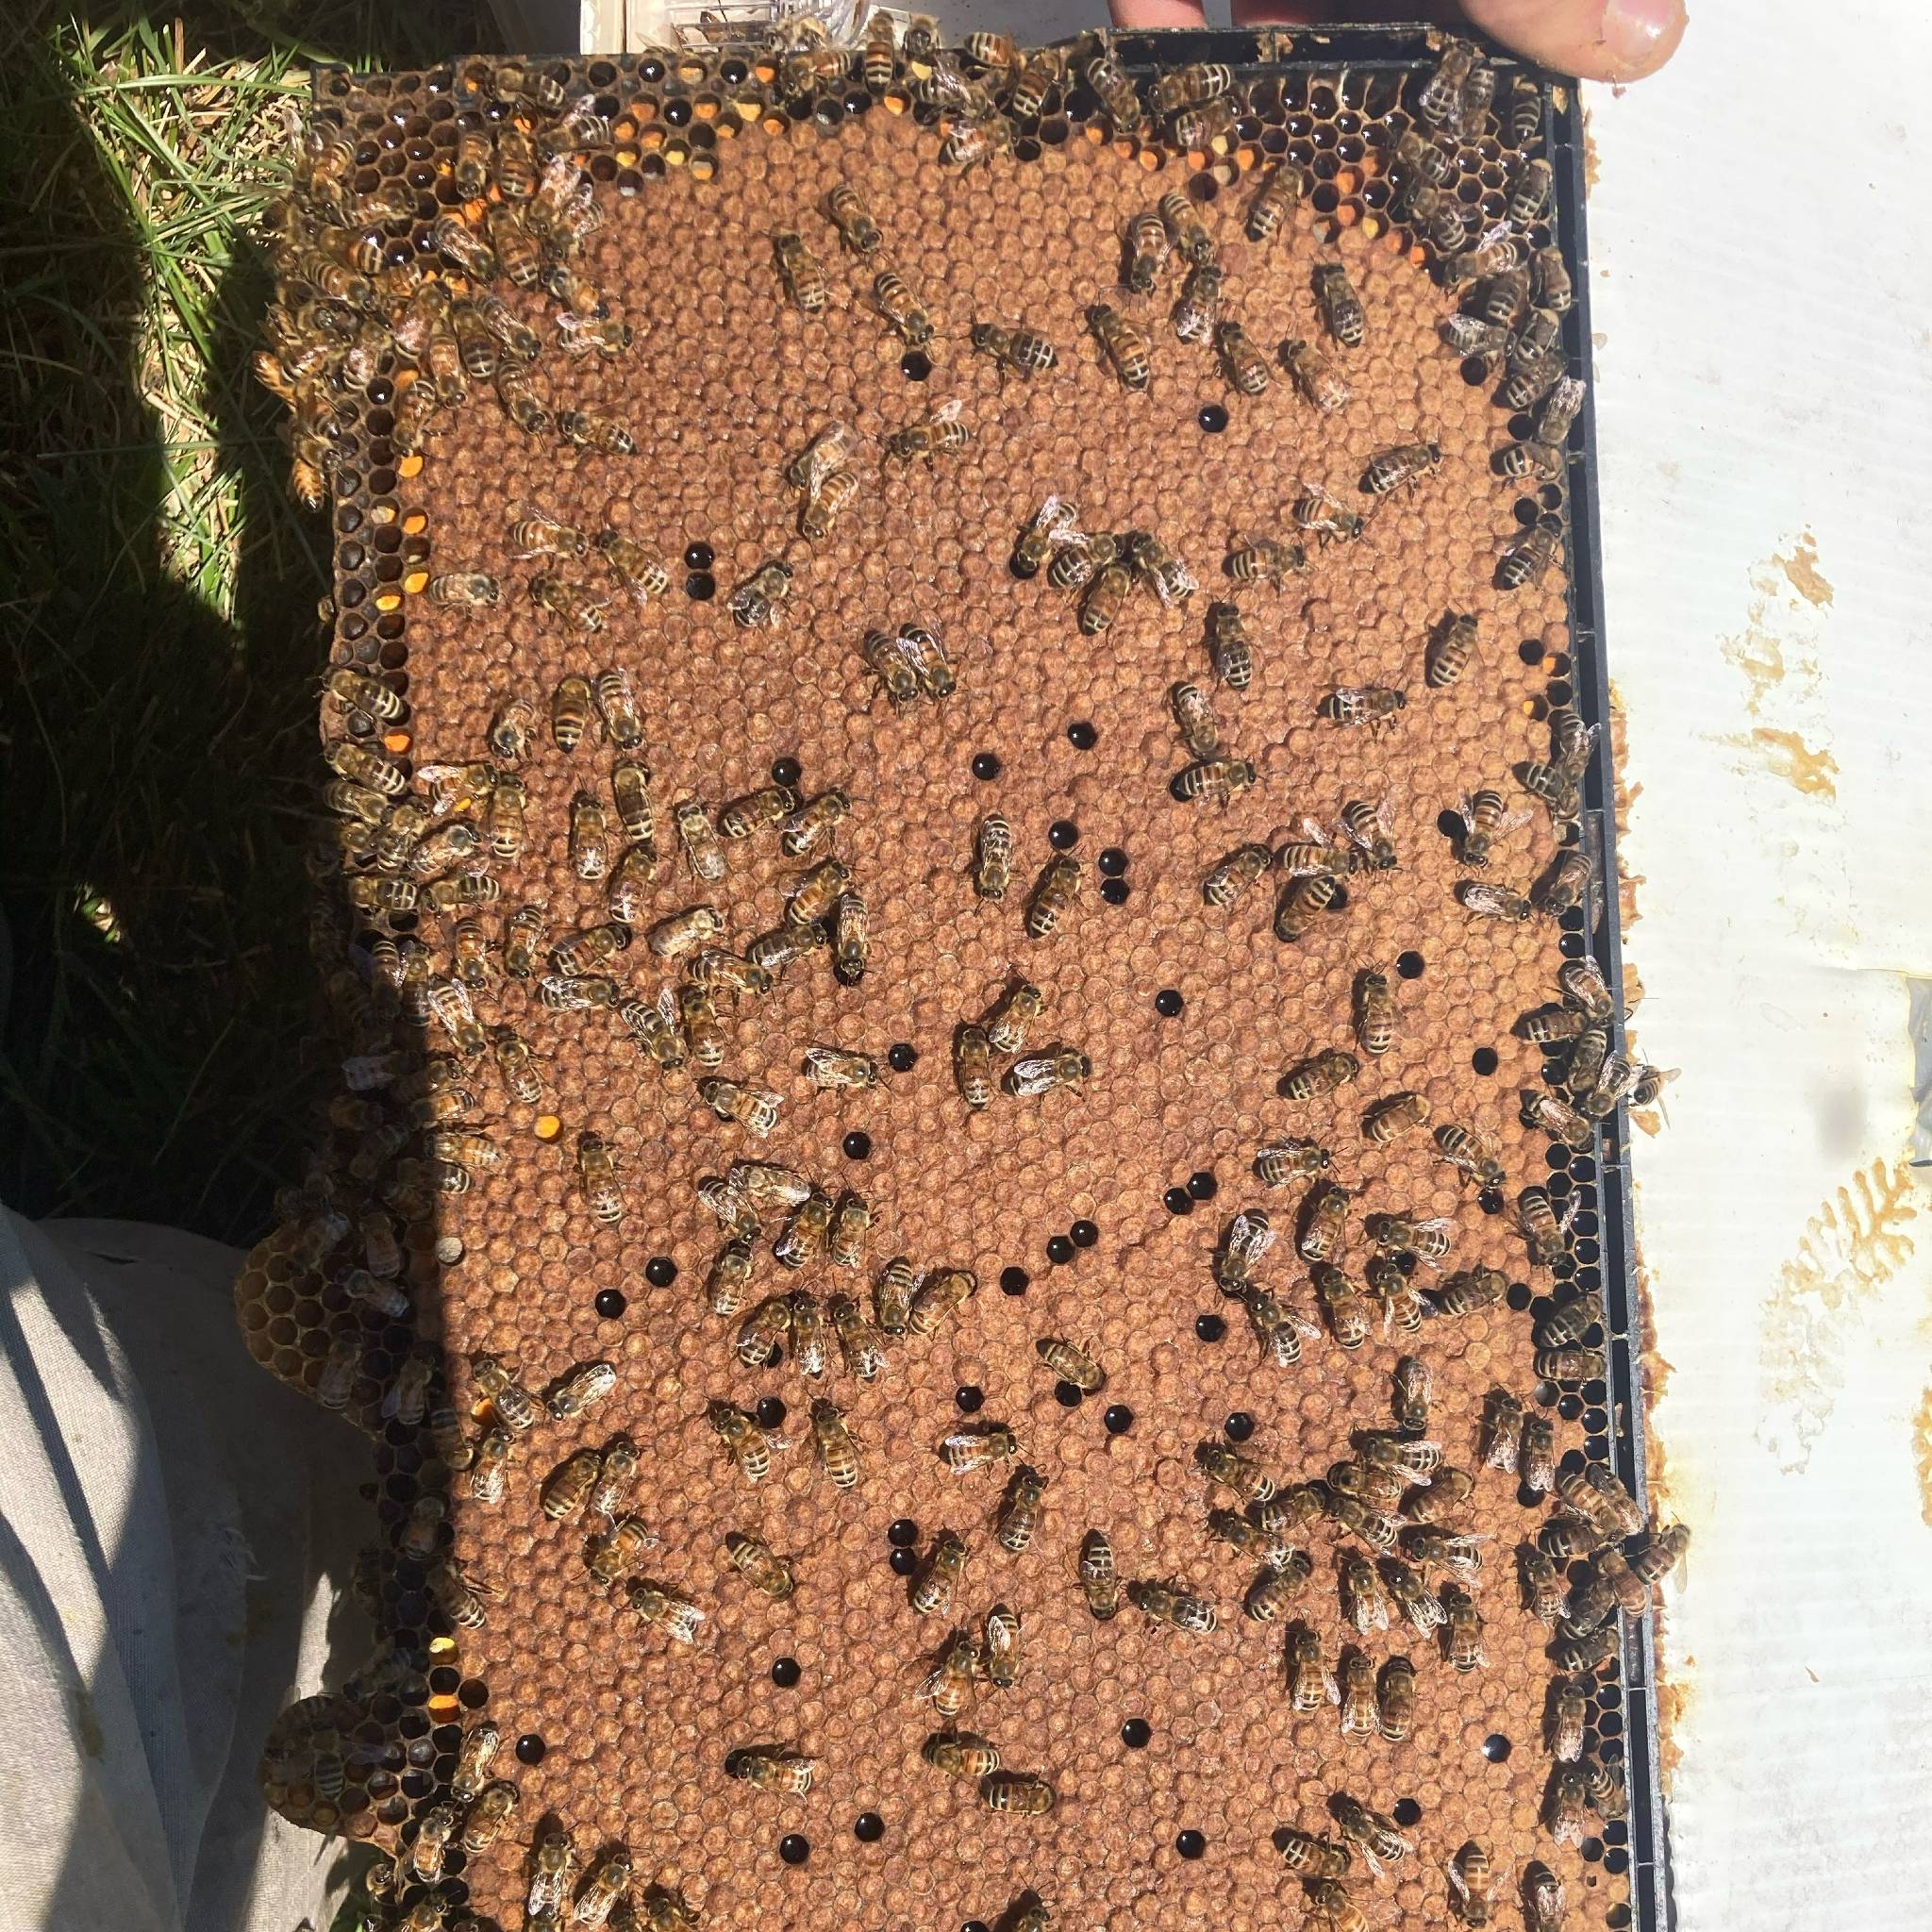 Frame of brood with solid laying pattern from Mill Creek Apiary